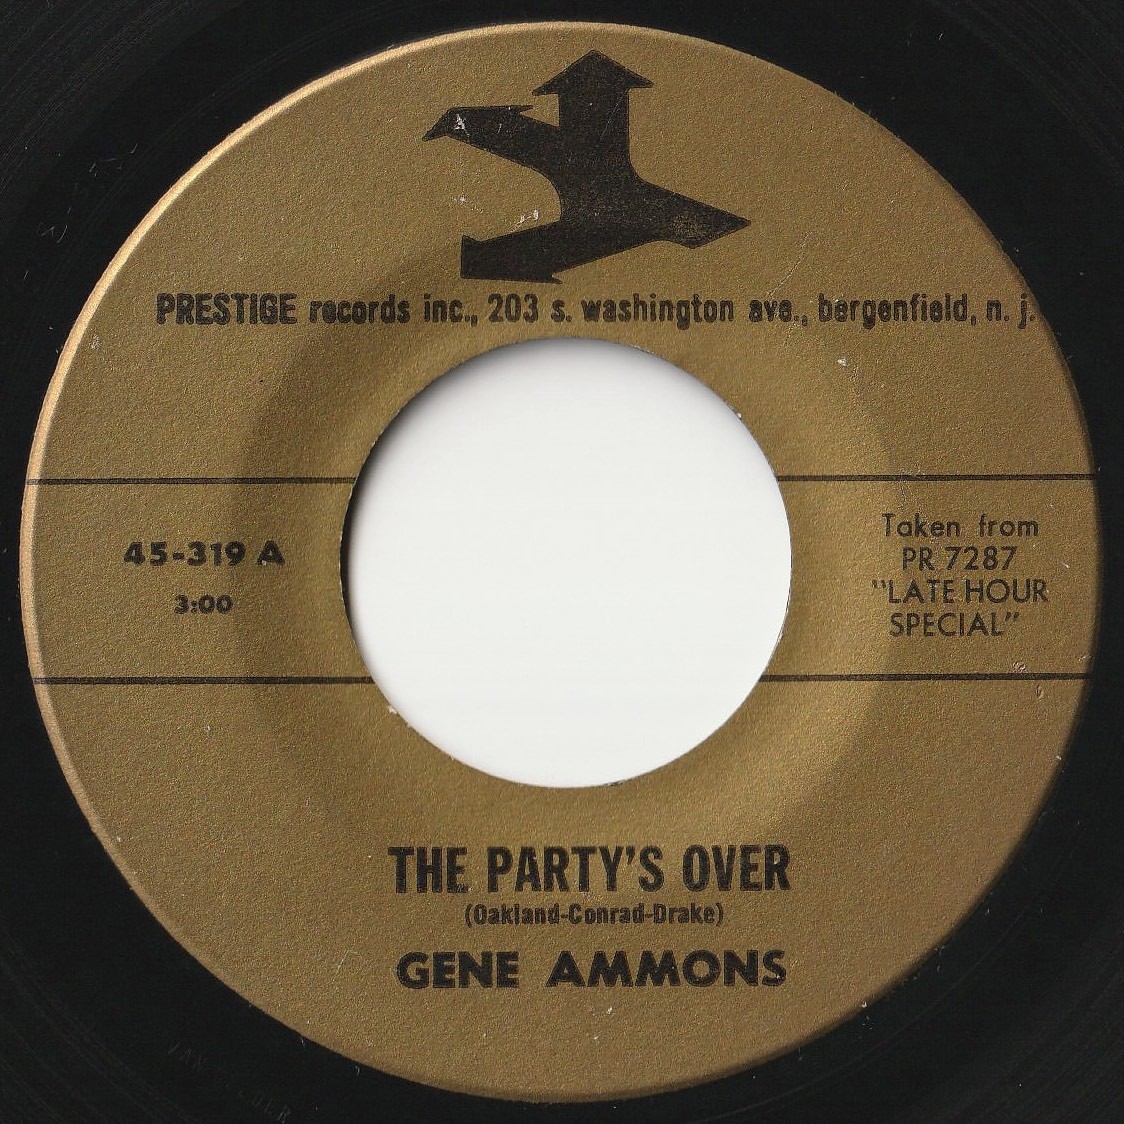 Gene Ammons The Party's Over / I Want To Be Loved Prestige US 45-319 202067 JAZZ ジャズ レコード 7インチ 45_画像1